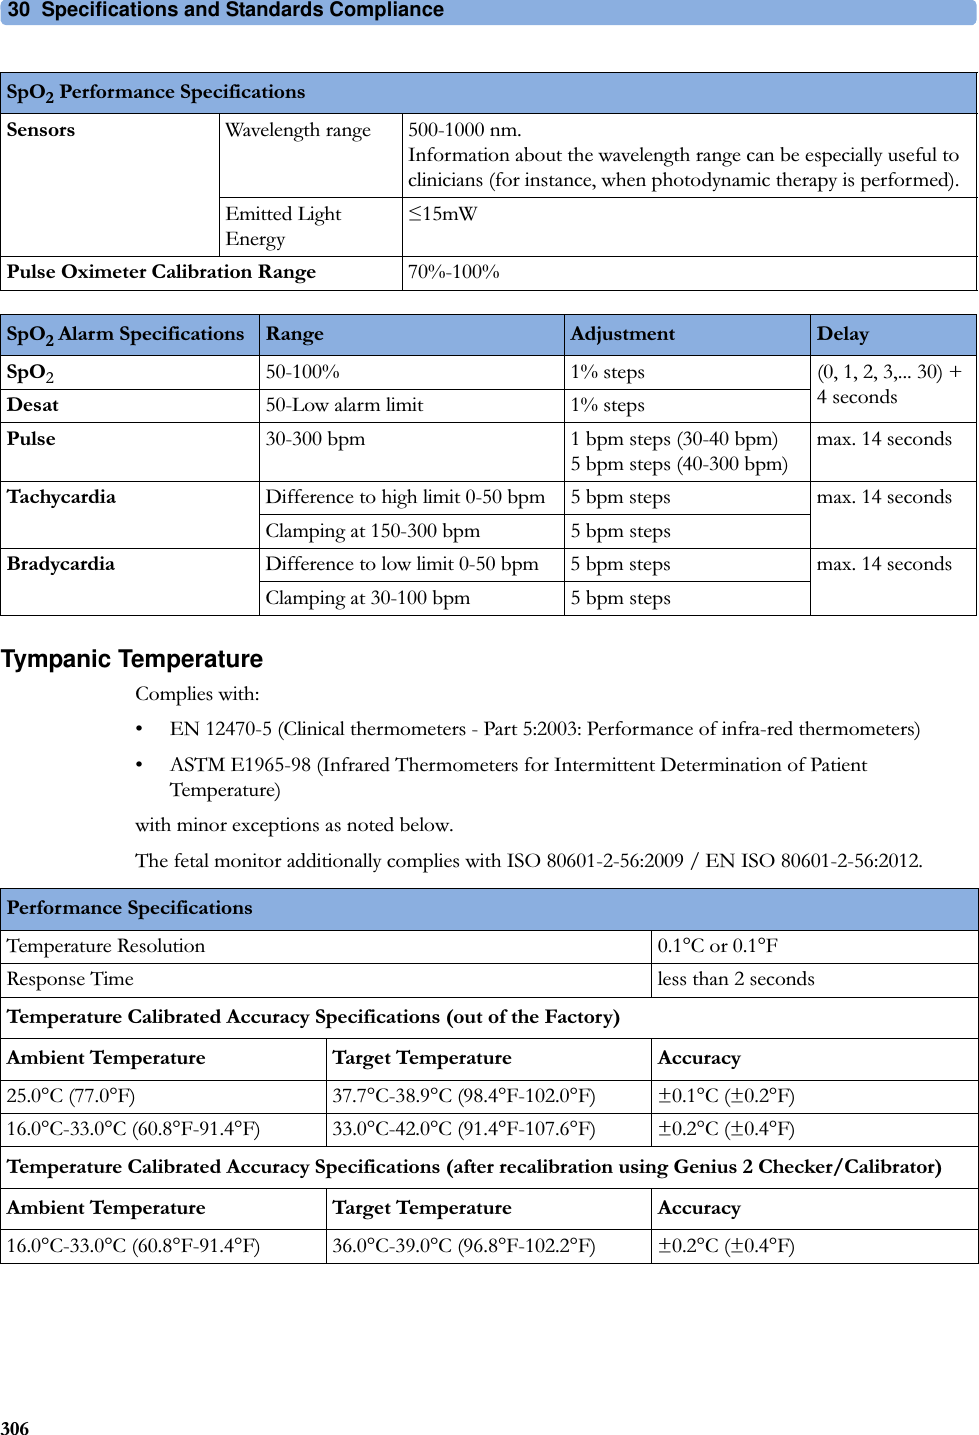 30  Specifications and Standards Compliance306Tympanic TemperatureComplies with:• EN 12470-5 (Clinical thermometers - Part 5:2003: Performance of infra-red thermometers)• ASTM E1965-98 (Infrared Thermometers for Intermittent Determination of Patient Temperature)with minor exceptions as noted below.The fetal monitor additionally complies with ISO 80601-2-56:2009 / EN ISO 80601-2-56:2012.Sensors Wavelength range 500-1000 nm. Information about the wavelength range can be especially useful to clinicians (for instance, when photodynamic therapy is performed).Emitted Light Energy15mWPulse Oximeter Calibration Range 70%-100%SpO2 Performance Specifications SpO2 Alarm Specifications Range Adjustment DelaySpO250-100% 1% steps (0, 1, 2, 3,... 30) + 4 secondsDesat 50-Low alarm limit 1% stepsPulse 30-300 bpm 1 bpm steps (30-40 bpm) 5 bpm steps (40-300 bpm)max. 14 secondsTachycardia Difference to high limit 0-50 bpm 5 bpm steps max. 14 secondsClamping at 150-300 bpm 5 bpm stepsBradycardia Difference to low limit 0-50 bpm 5 bpm steps max. 14 secondsClamping at 30-100 bpm 5 bpm stepsPerformance SpecificationsTemperature Resolution 0.1°C or 0.1°FResponse Time less than 2 secondsTemperature Calibrated Accuracy Specifications (out of the Factory)Ambient Temperature Target Temperature Accuracy25.0°C (77.0°F) 37.7°C-38.9°C (98.4°F-102.0°F) ±0.1°C (±0.2°F)16.0°C-33.0°C (60.8°F-91.4°F) 33.0°C-42.0°C (91.4°F-107.6°F) ±0.2°C (±0.4°F)Temperature Calibrated Accuracy Specifications (after recalibration using Genius 2 Checker/Calibrator)Ambient Temperature Target Temperature Accuracy16.0°C-33.0°C (60.8°F-91.4°F) 36.0°C-39.0°C (96.8°F-102.2°F) ±0.2°C (±0.4°F)